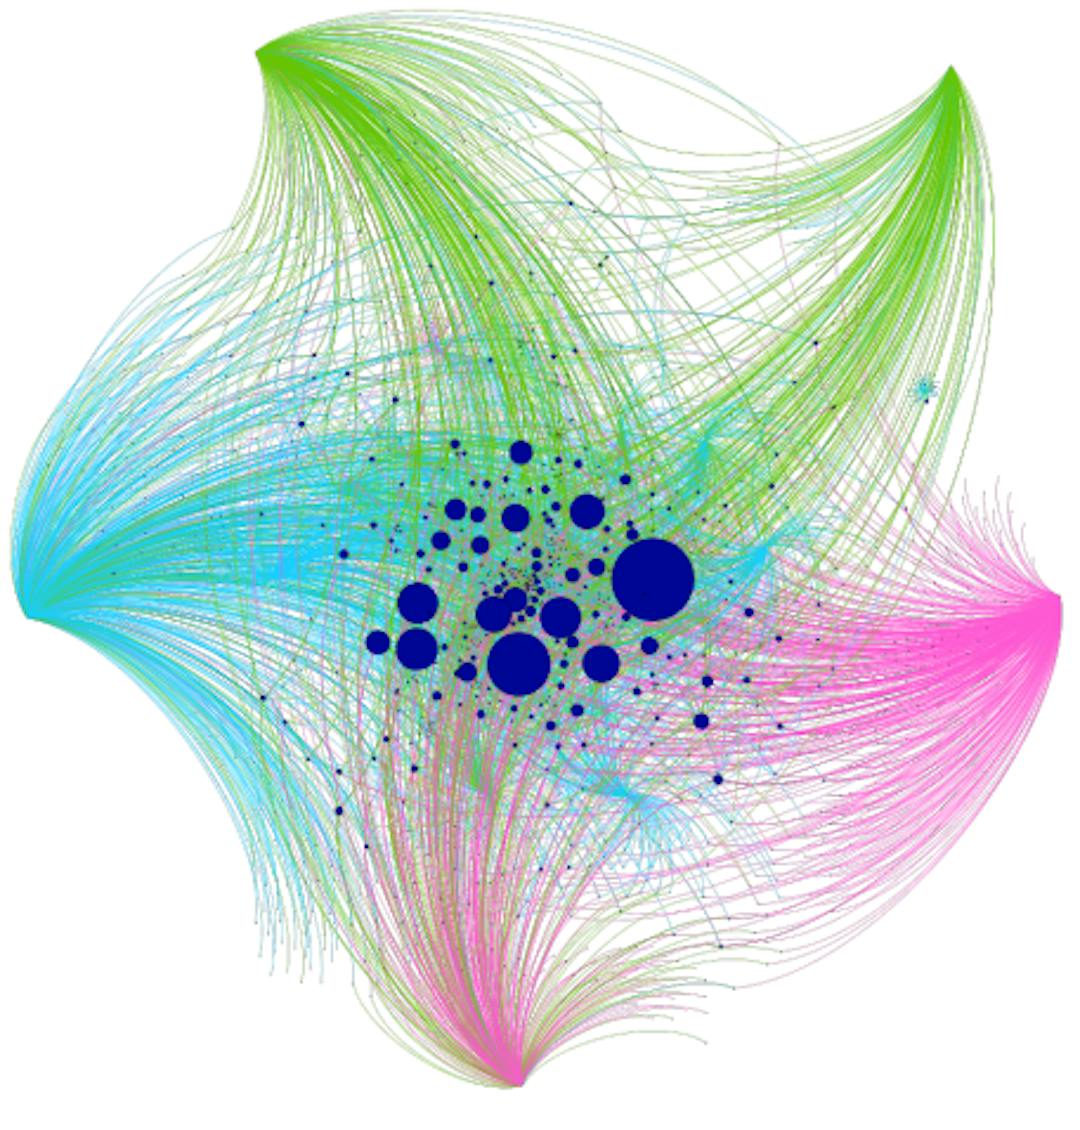 Figure 3. This graph illustrates the five most widely shared instances of disinformation content, highlighting their interconnectedness across various groups (dark blue nodes at the center). The edges portrayed in pink signify the shared videos within these groups, while the blue edges represent memes/photos, and the green edges signify URLs